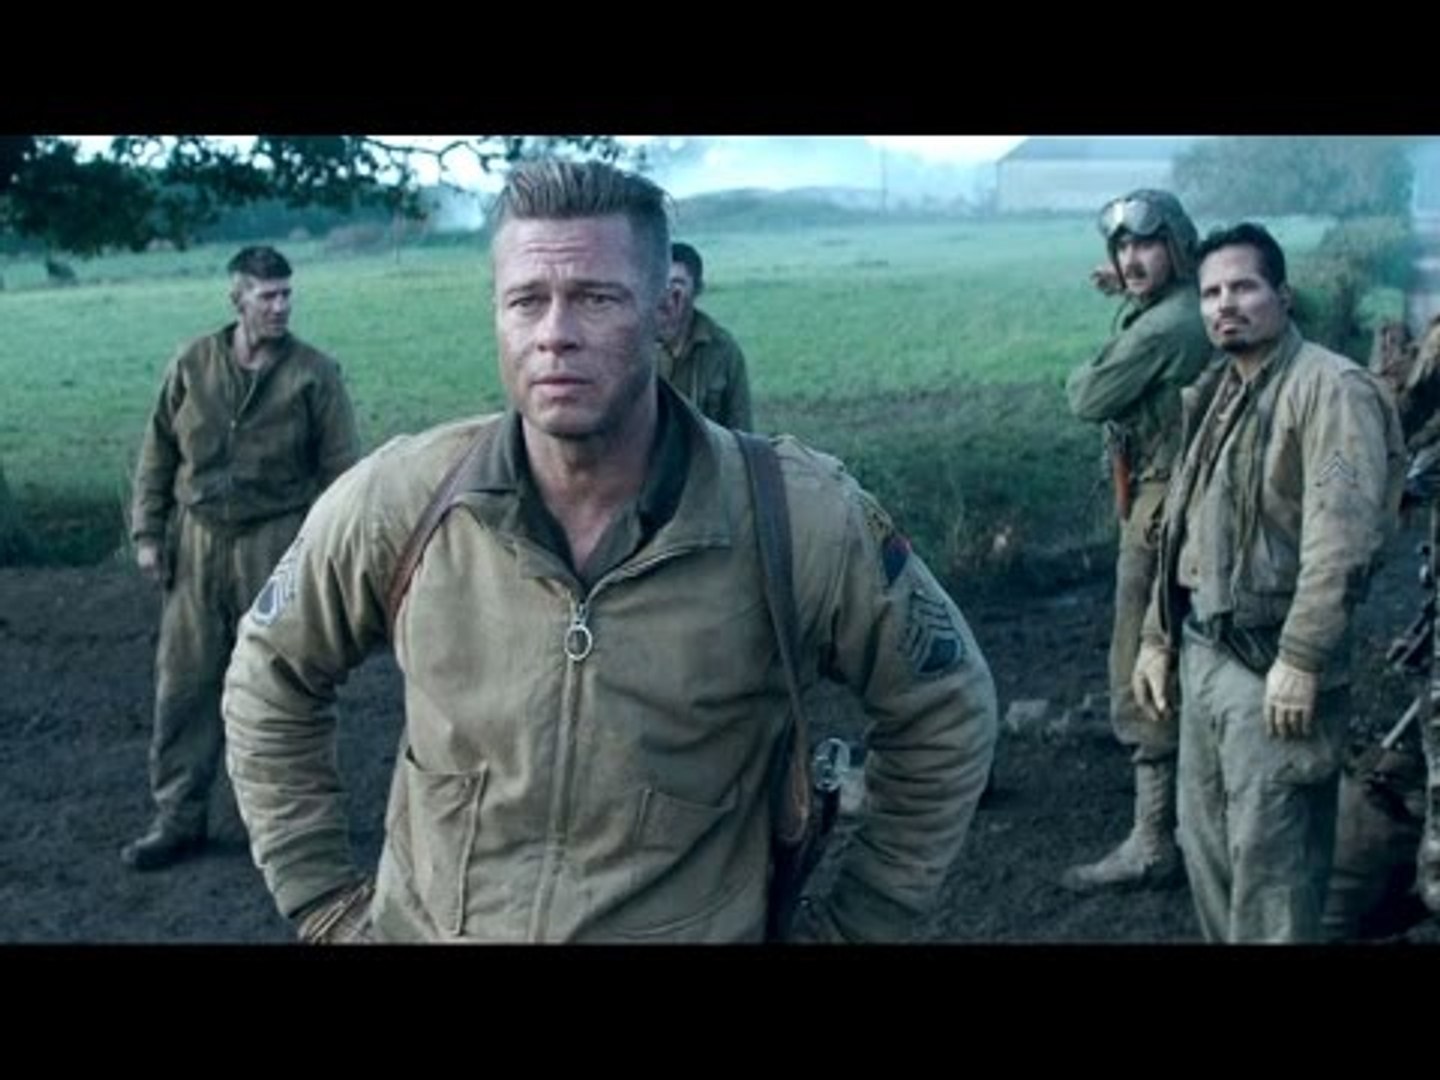 FURY Movie Clip "Man Up!" - video Dailymotion